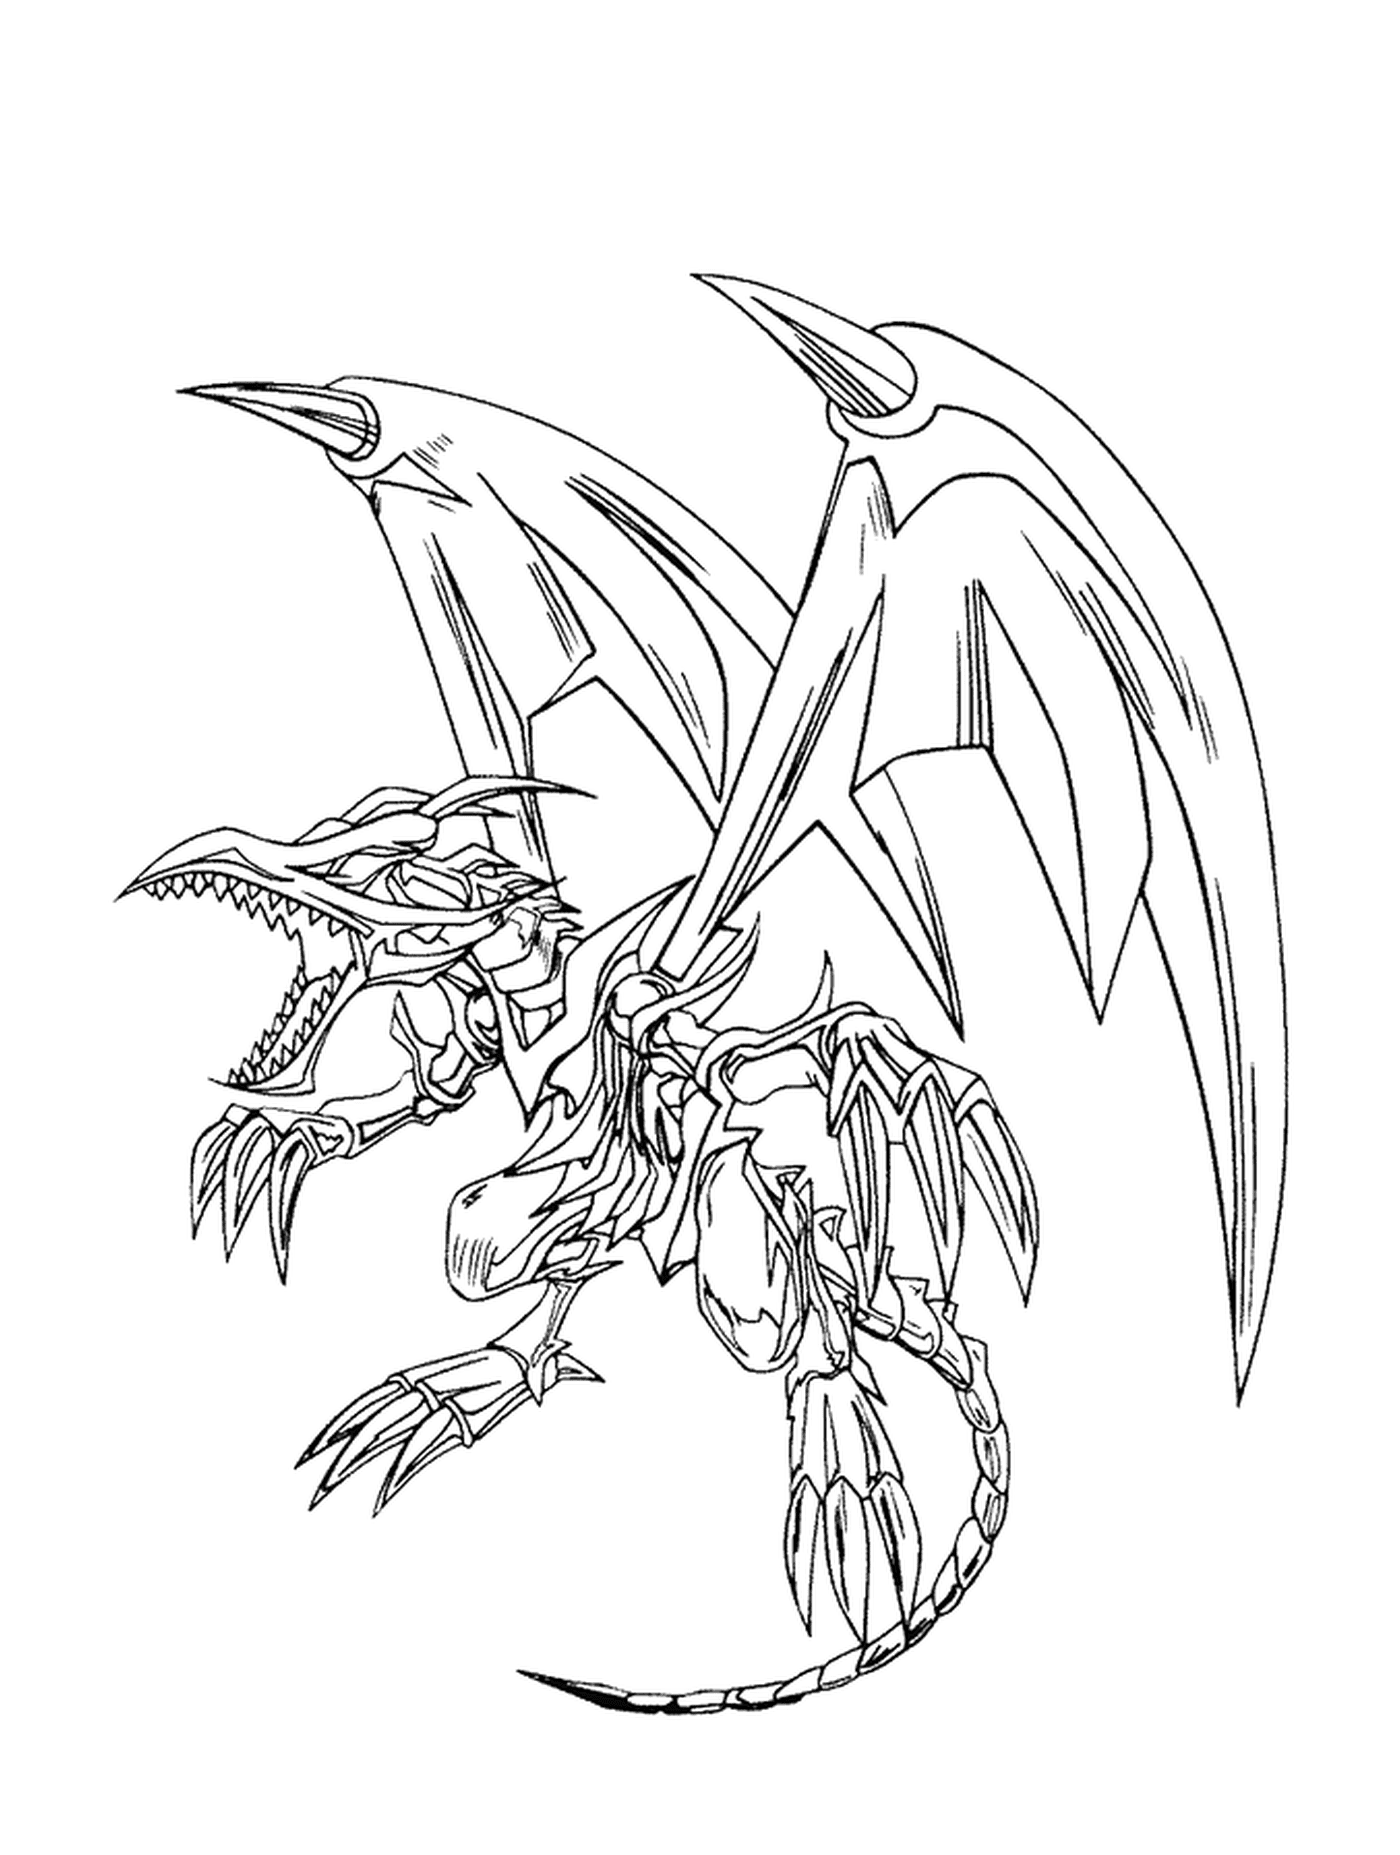  A dragon in an online drawing style 